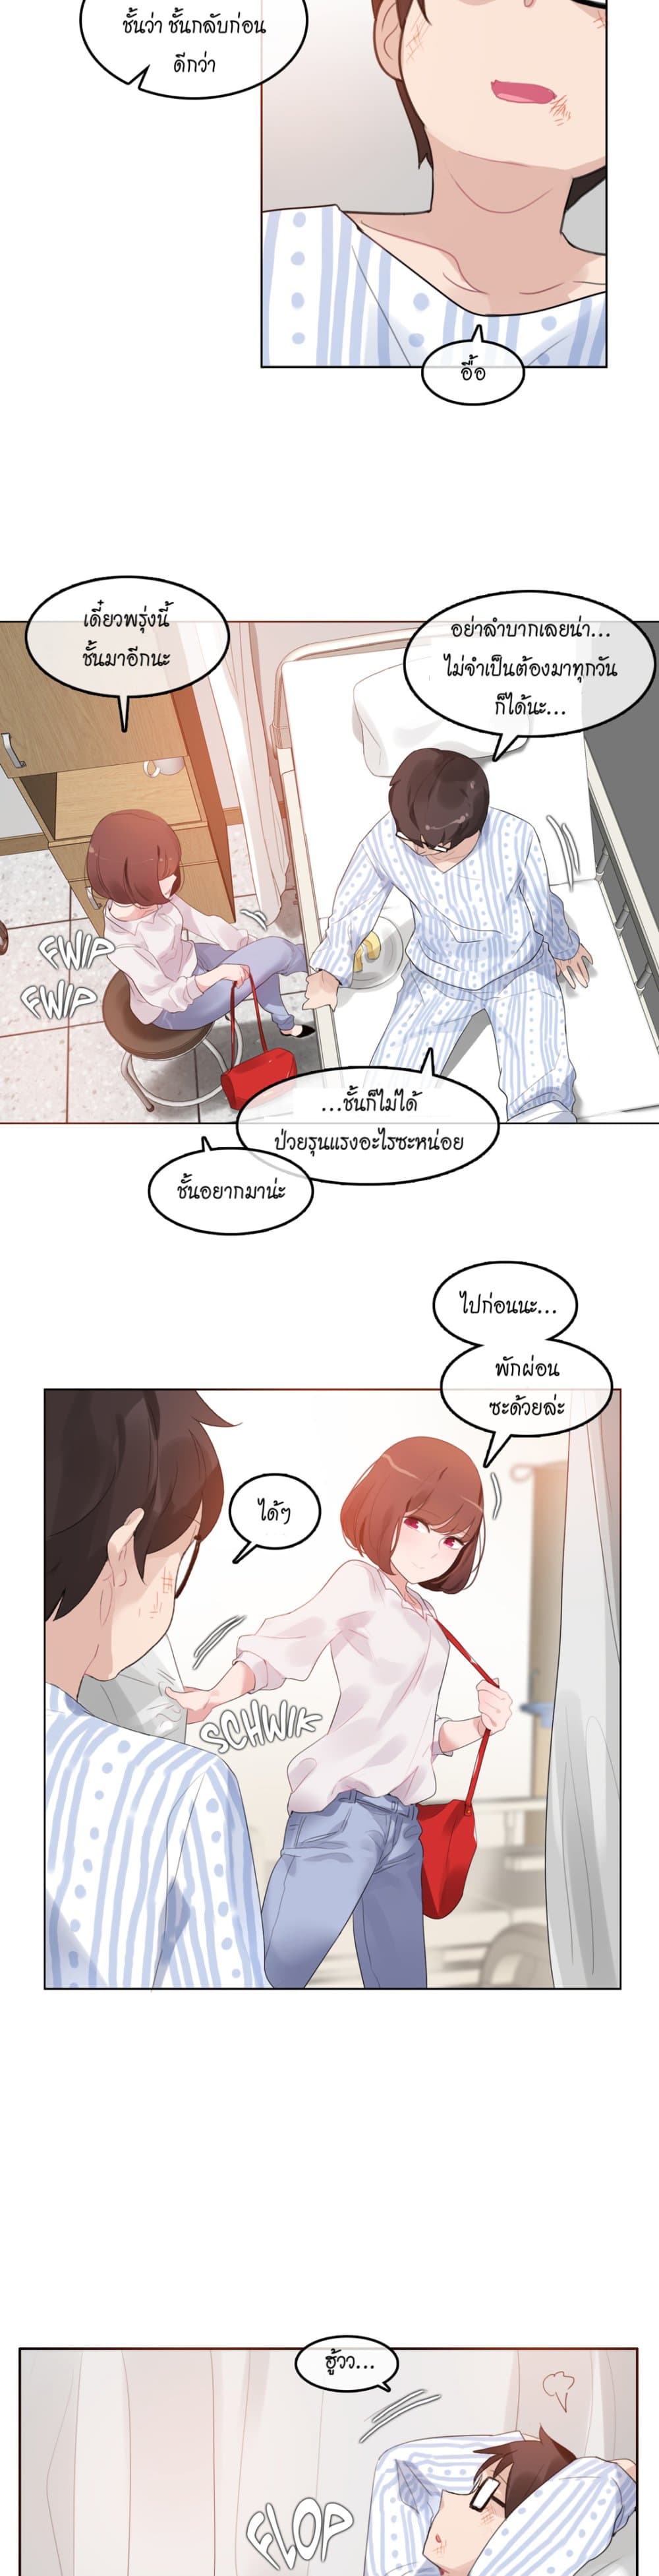 A Pervert's Daily Life 46-46